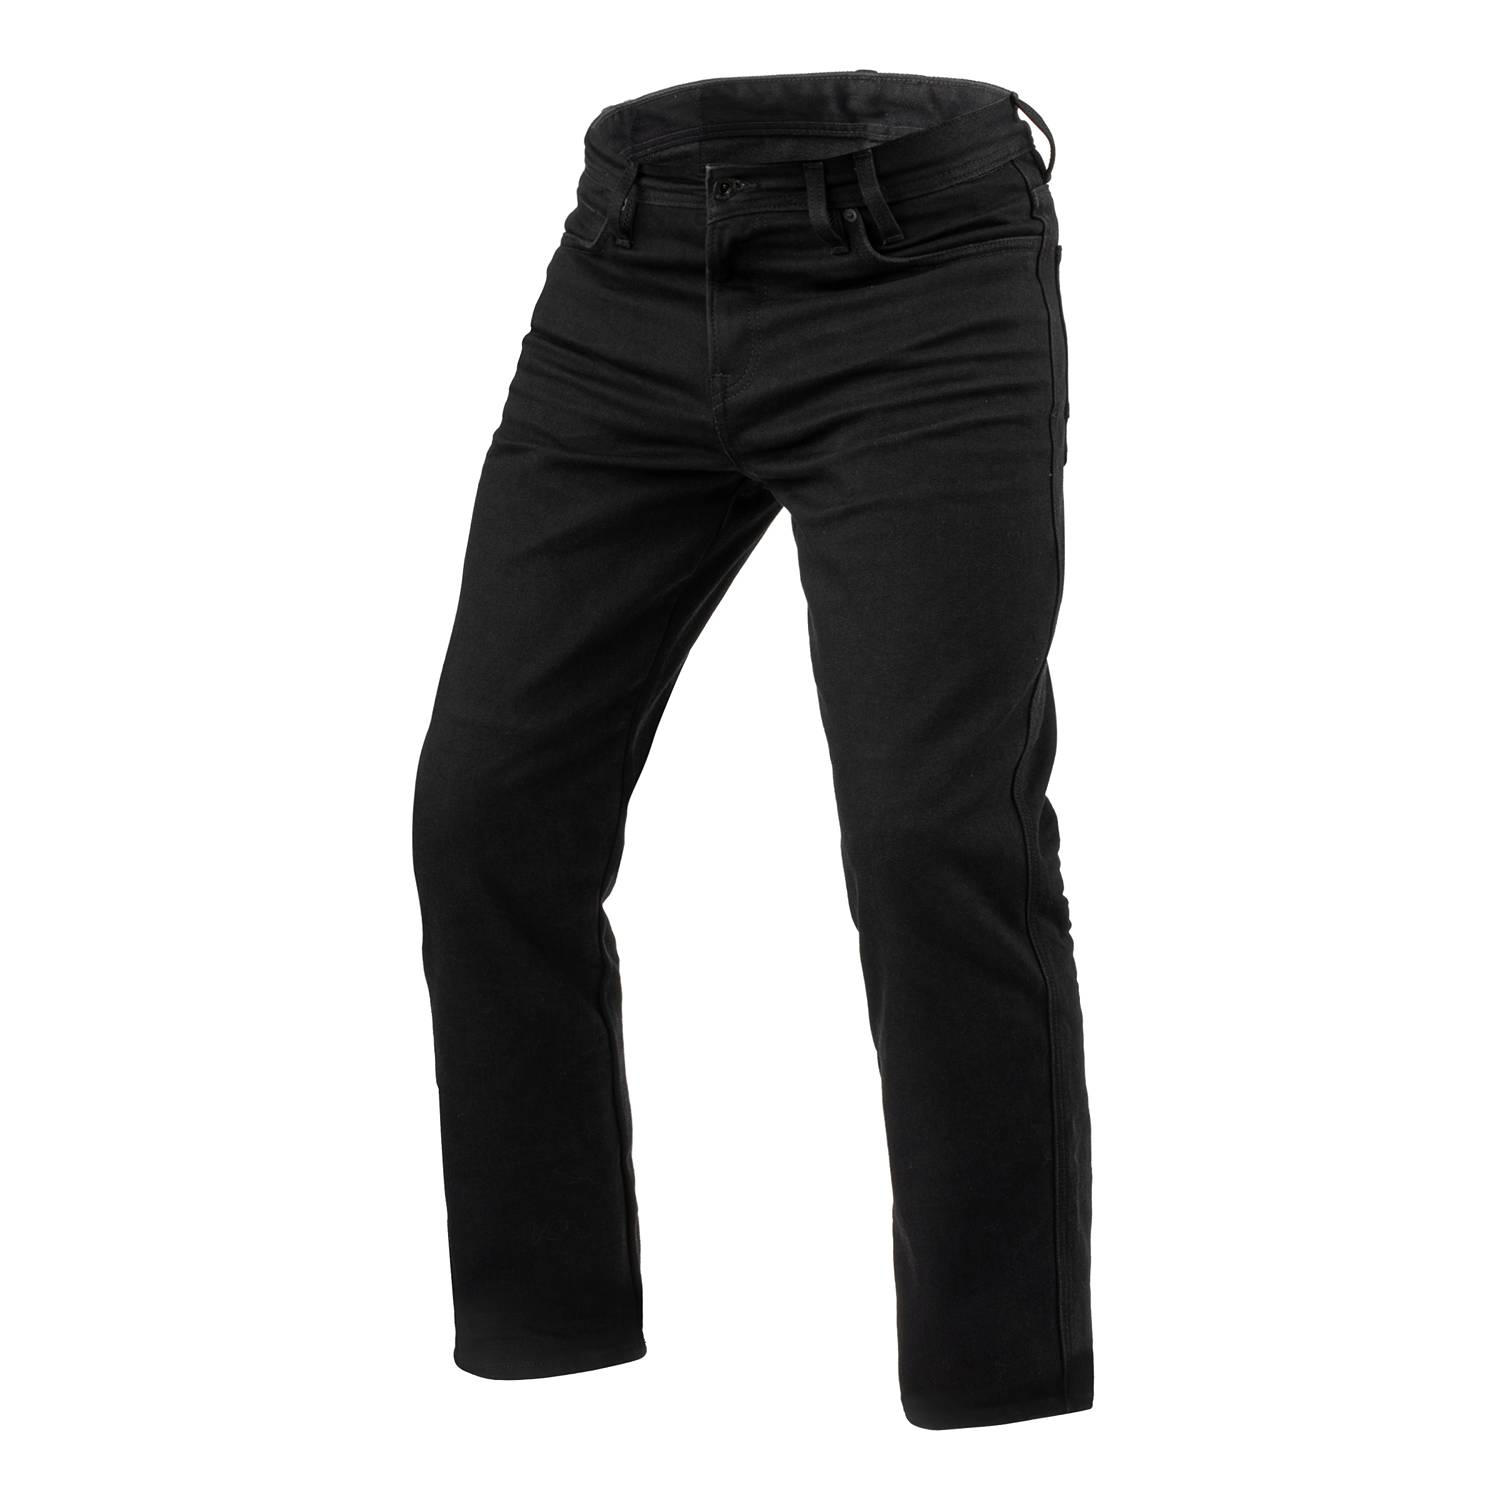 Image of REV'IT! Jeans Lombard 3 RF Black L36 Motorcycle Jeans Taille L36/W38